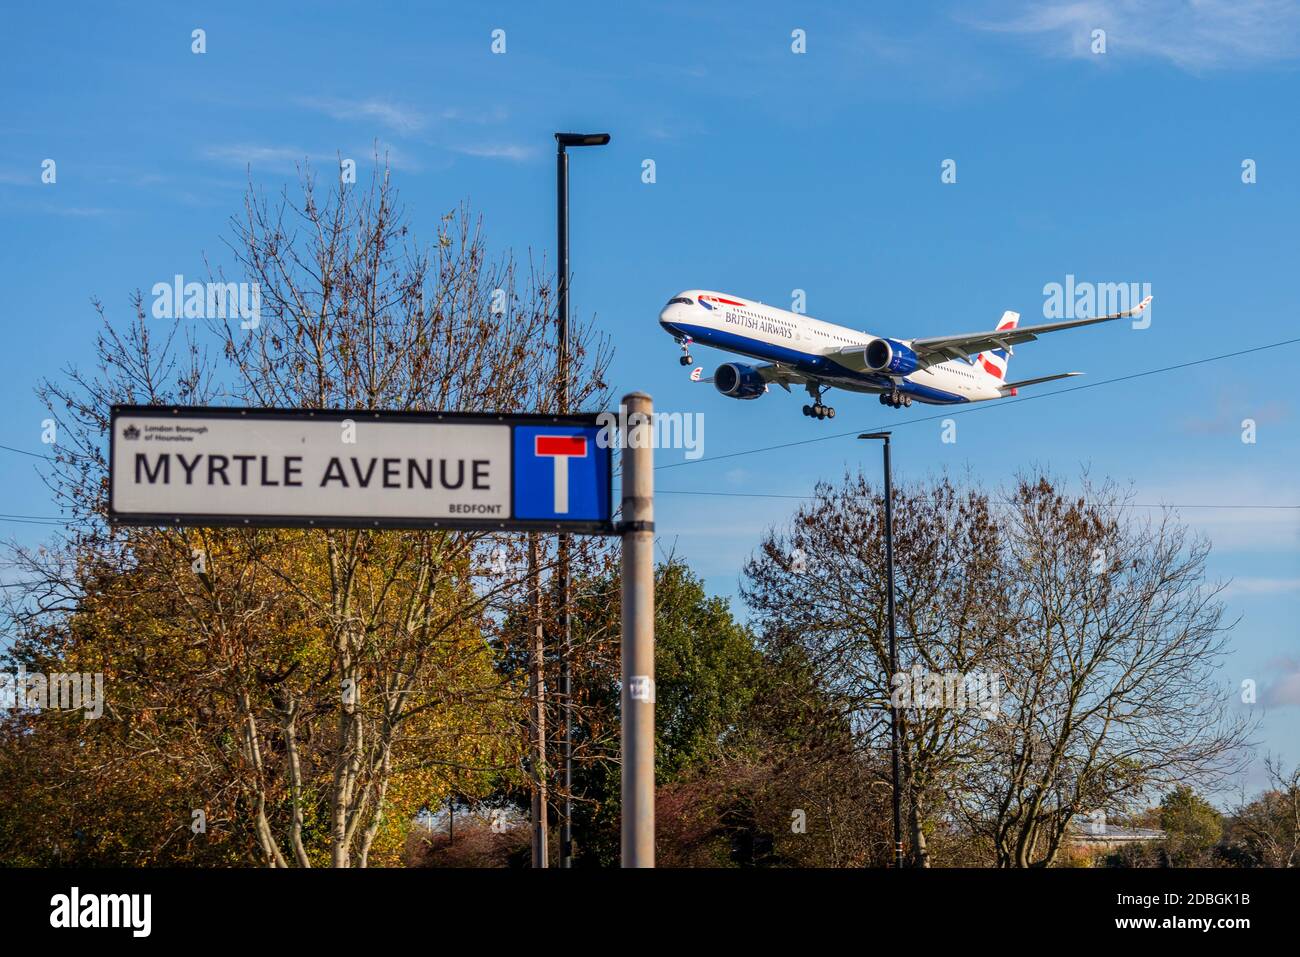 British Airways jet airliner plane on approach to land at London Heathrow Airport, UK, over residential area in Myrtle Avenue. Low flying. Street sign Stock Photo